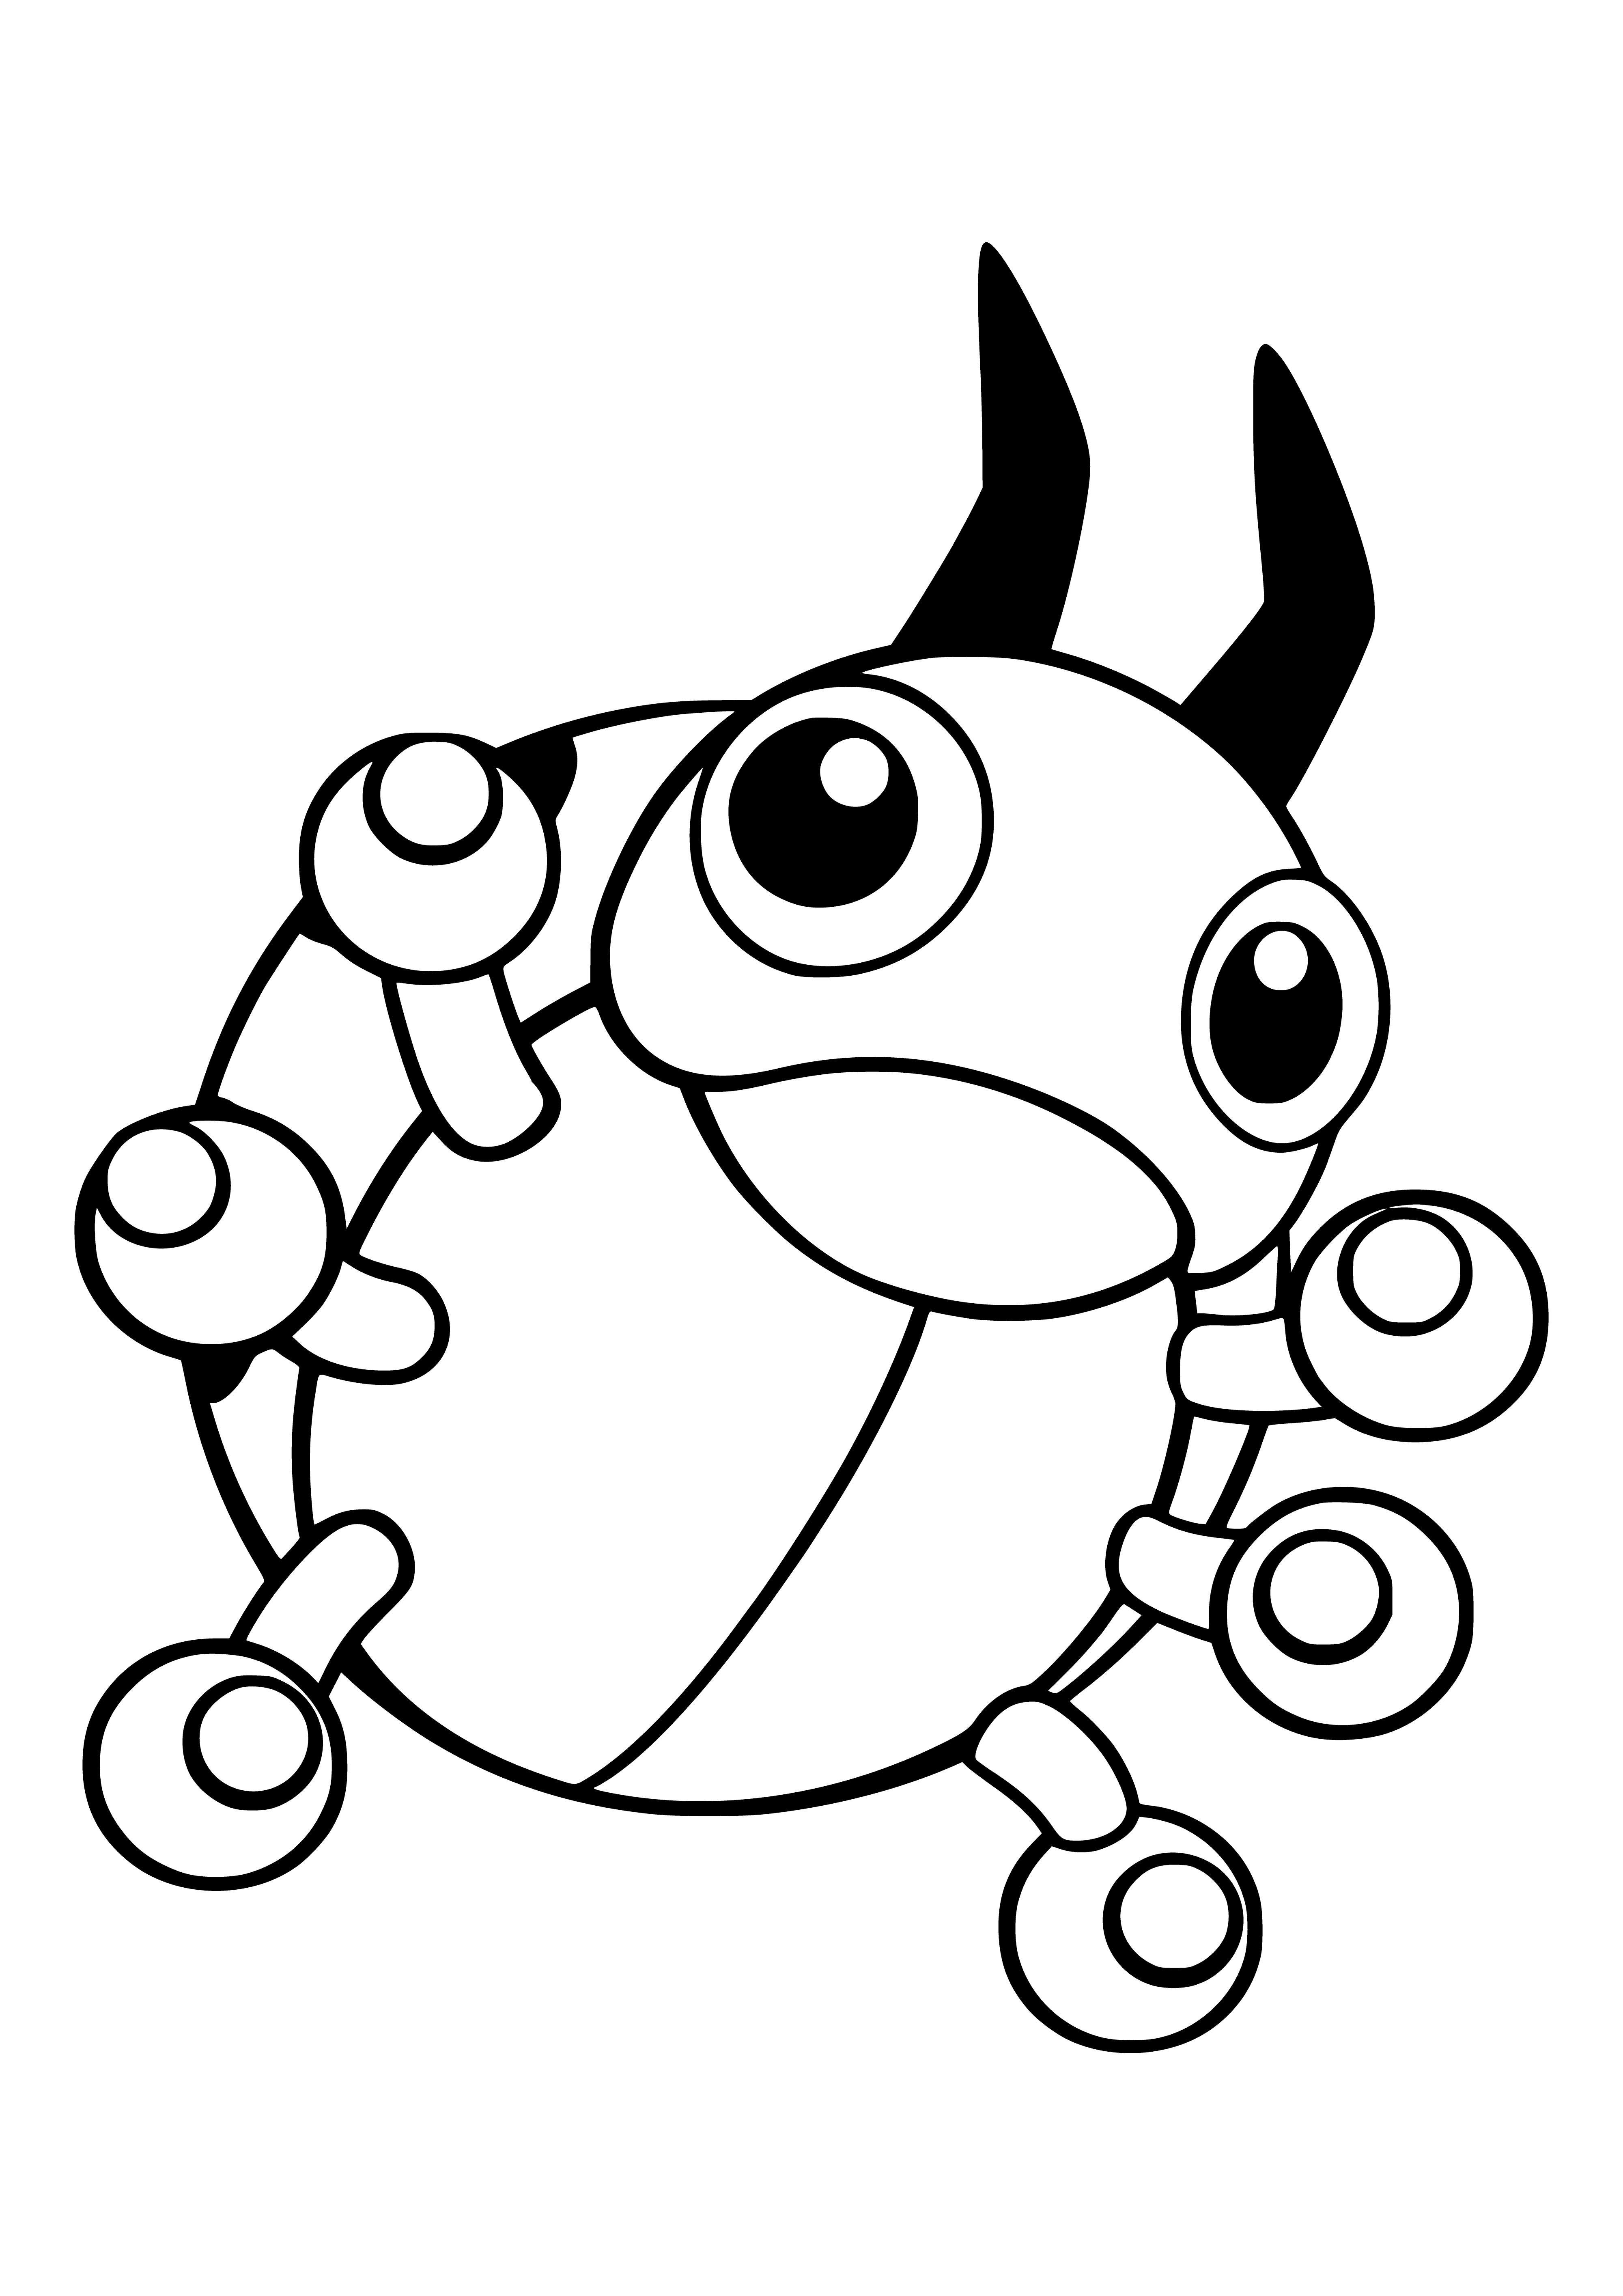 coloring page: Lediba evolves from certain butterflies and moths, struggling to control body temperature when it hatches.